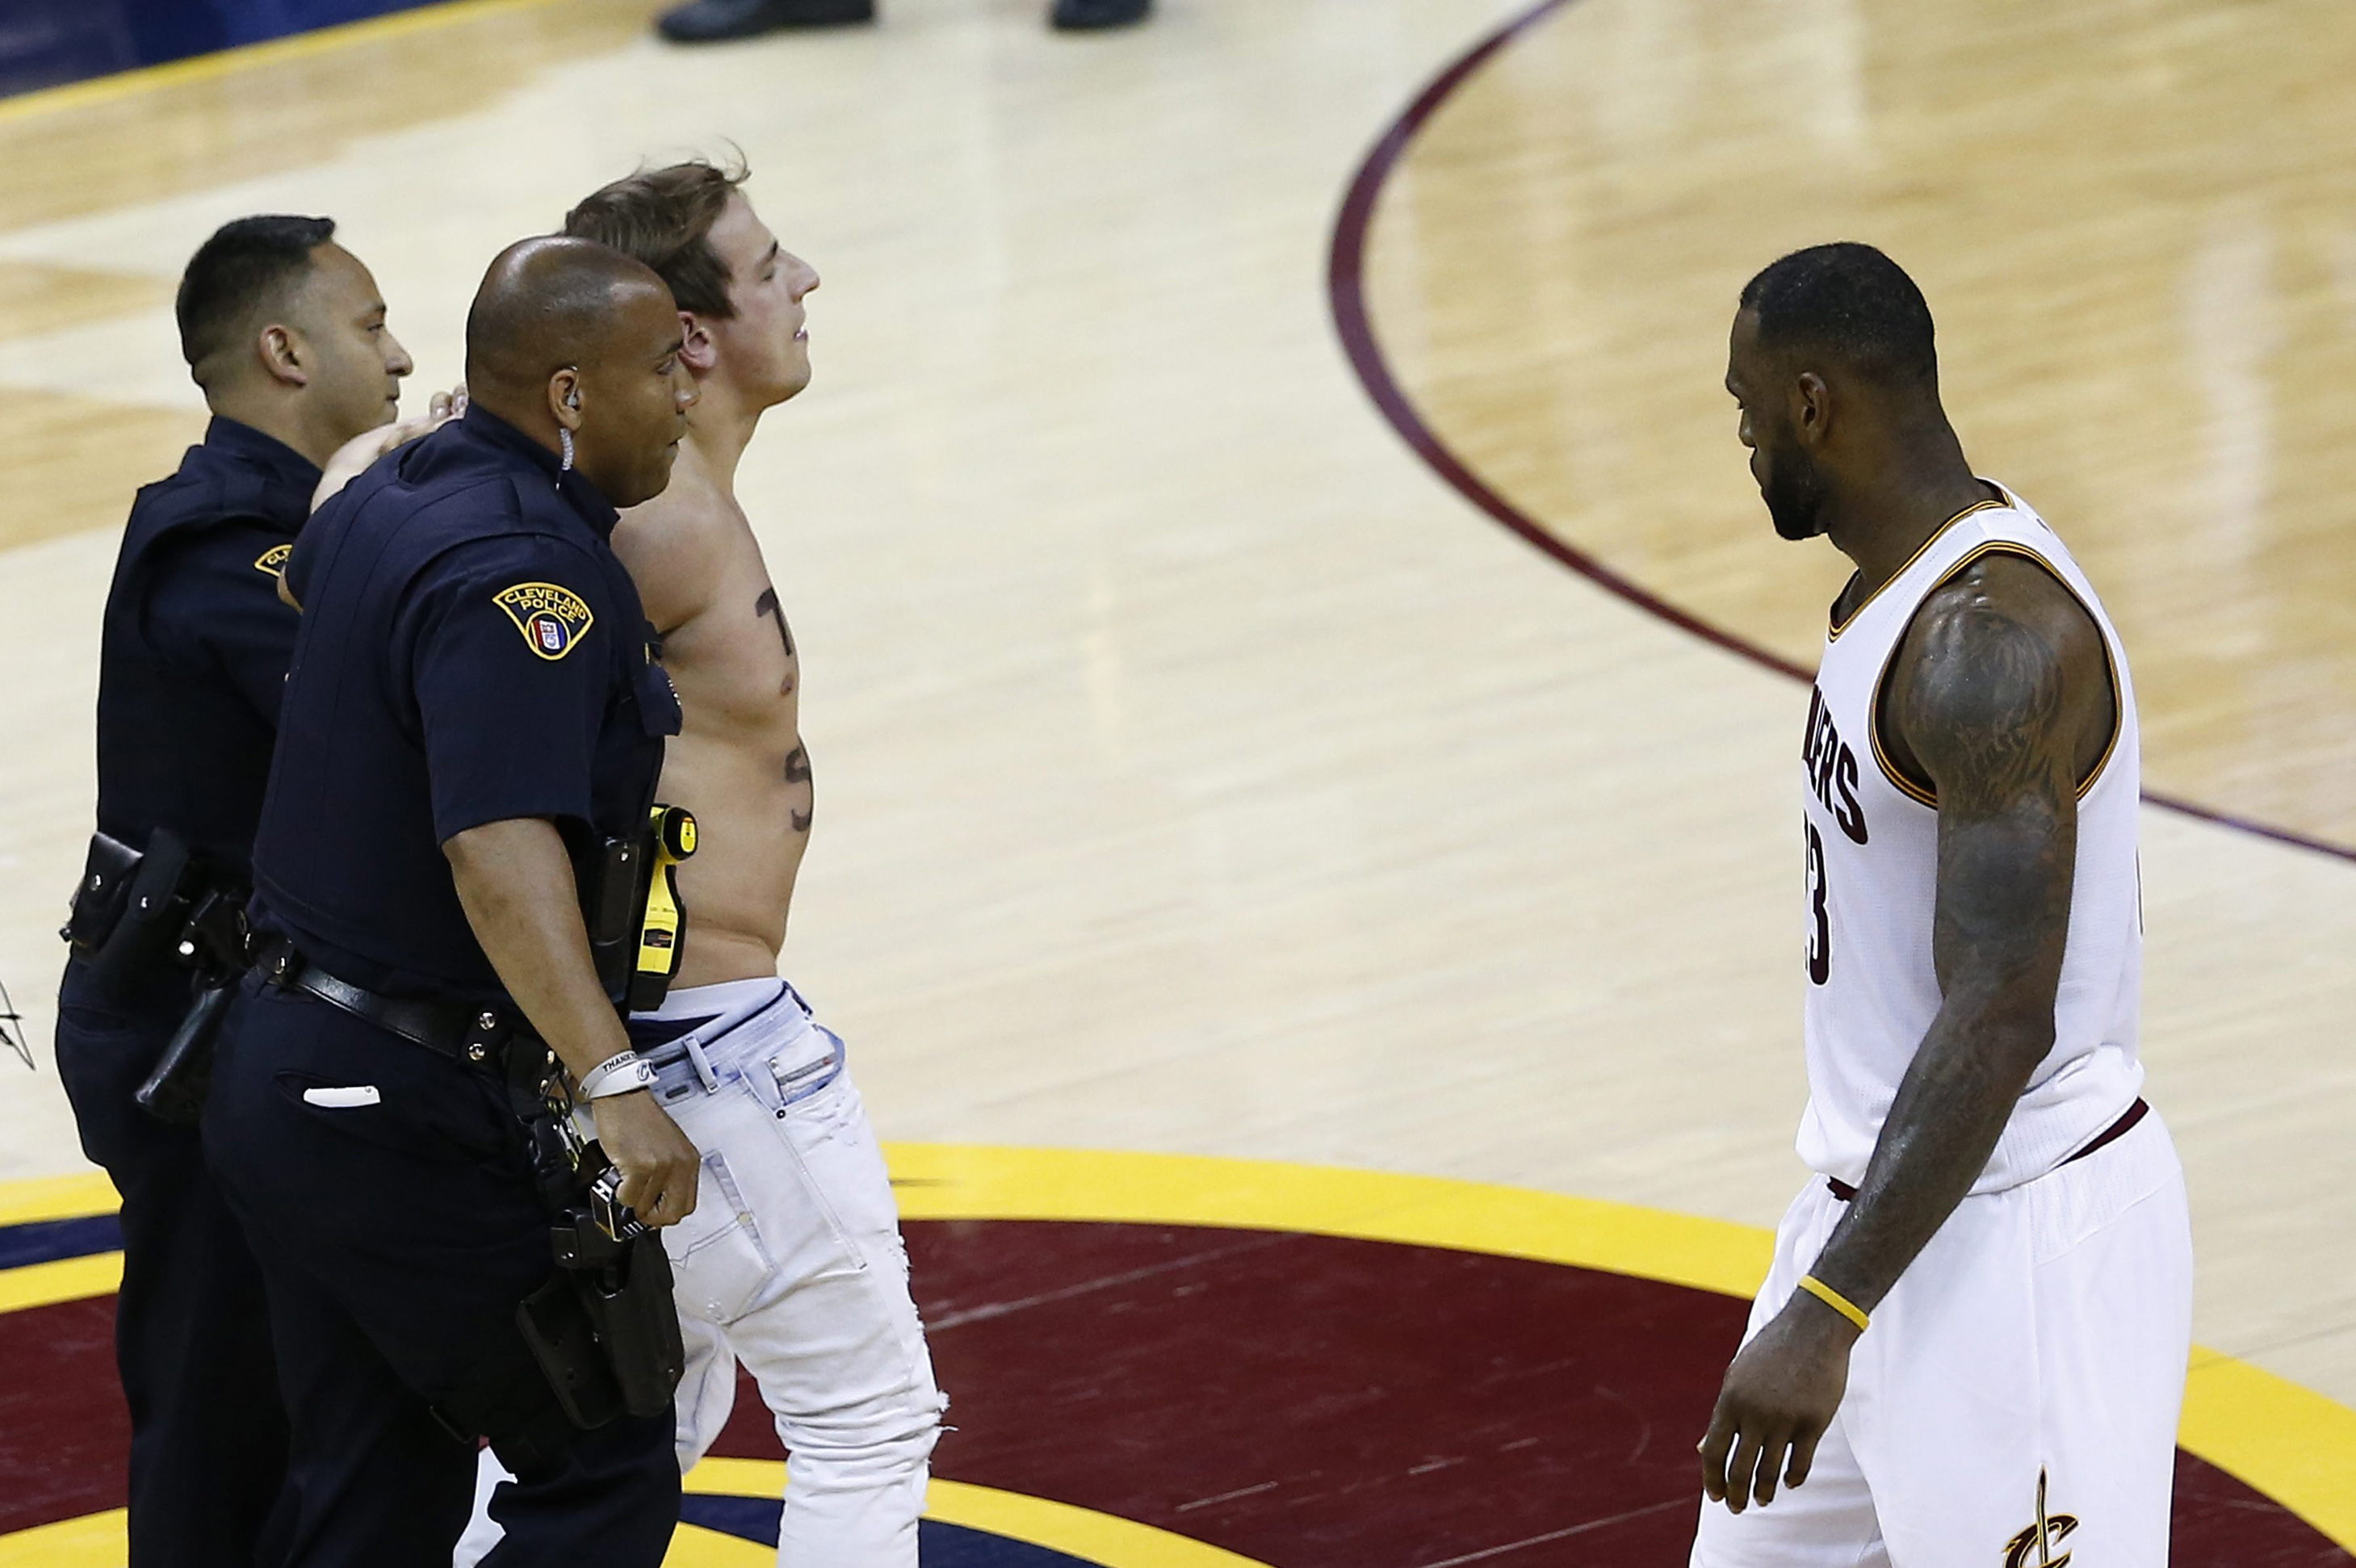 epa05356397 Cleveland Cavaliers player LeBron James (R) watches as the police walk a man in handcuffs off the court after he ran on to the court, stopping play during the second half of the NBA Finals basketball game four between the Golden State Warriors and the Cleveland Cavaliers at the Quicken Loans Arena in Cleveland, Ohio, USA, 10 June 2016. EPA/LARRY W. SMITH CORBIS OUT ORG XMIT: LWS113